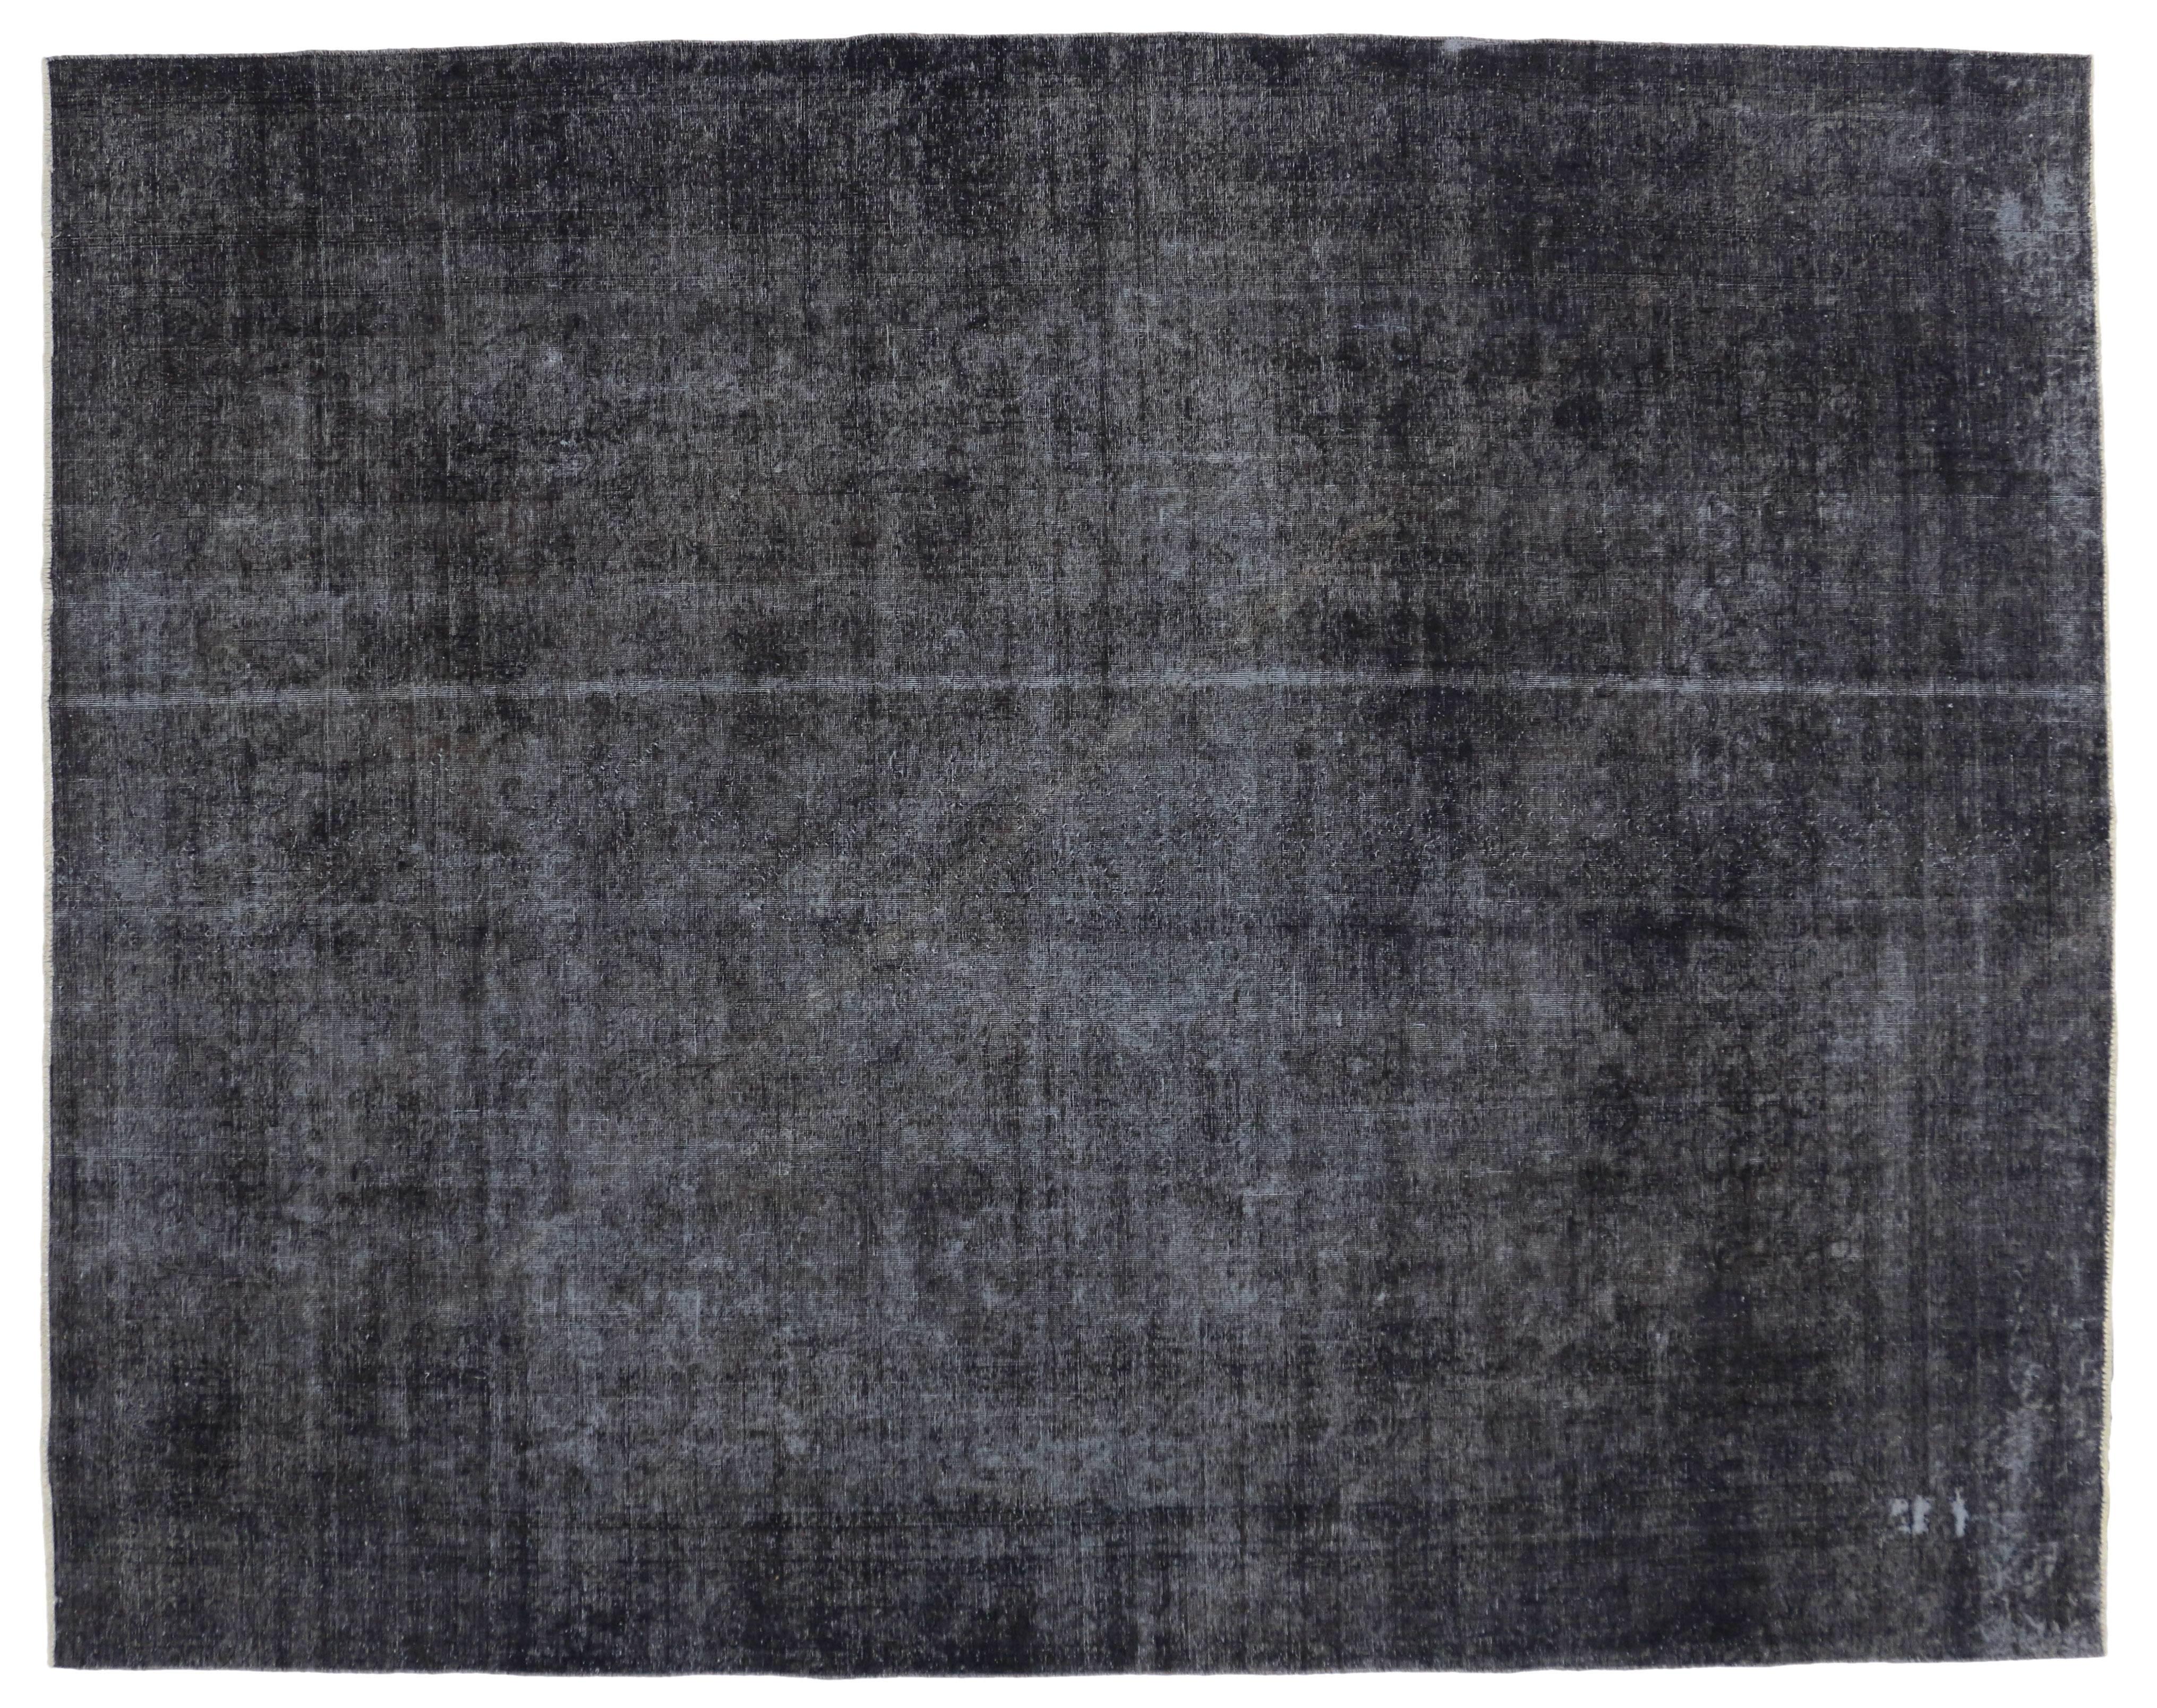 20th Century Distressed Antique Persian Charcoal Overdyed Rug with Modern Industrial Style